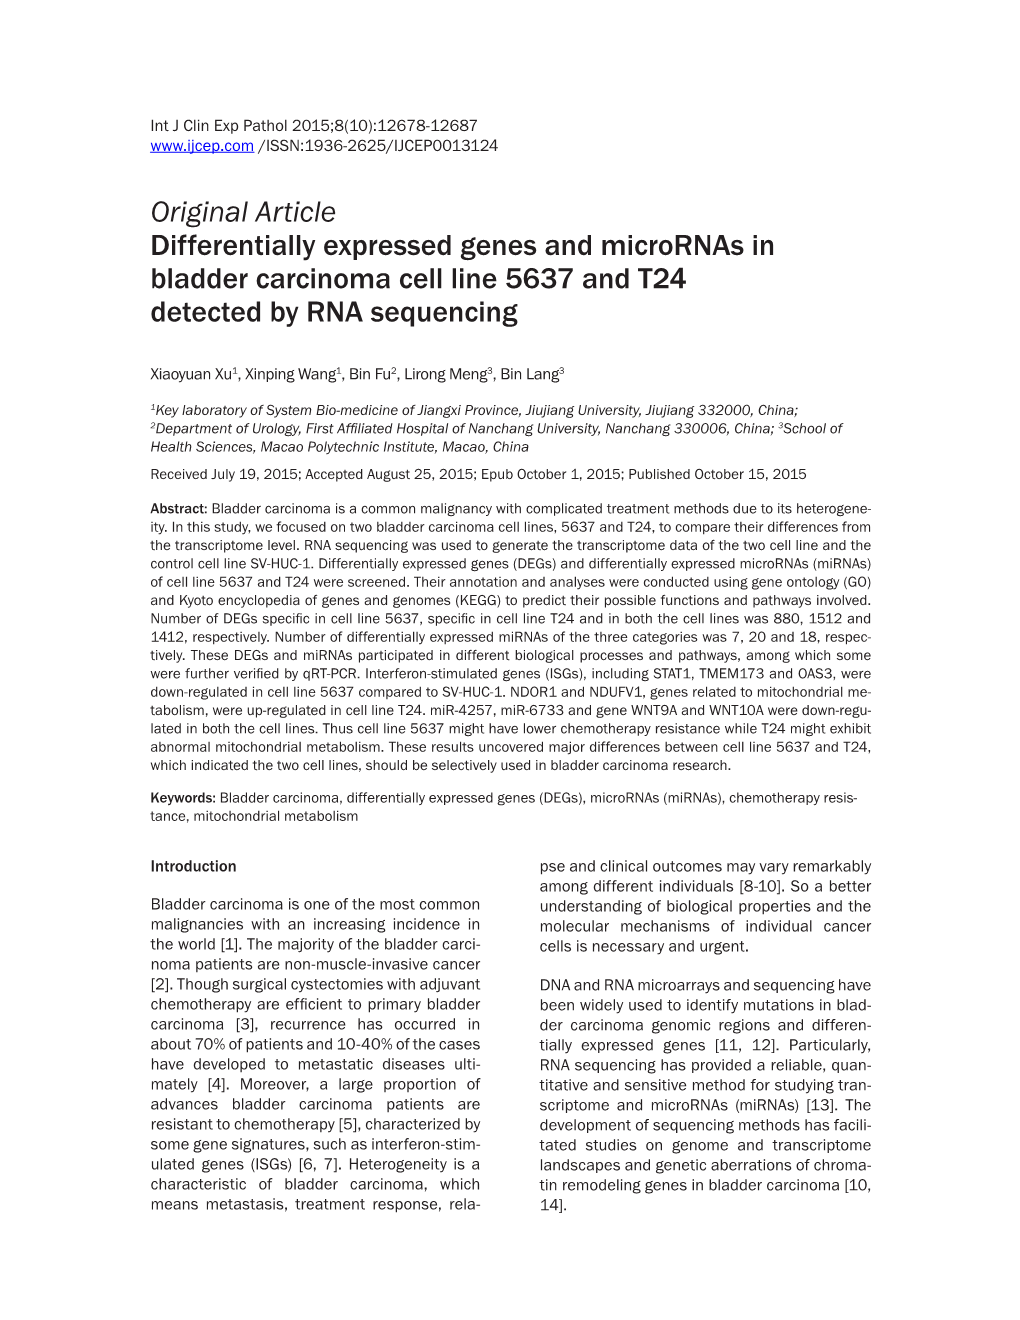 Original Article Differentially Expressed Genes and Micrornas in Bladder Carcinoma Cell Line 5637 and T24 Detected by RNA Sequencing